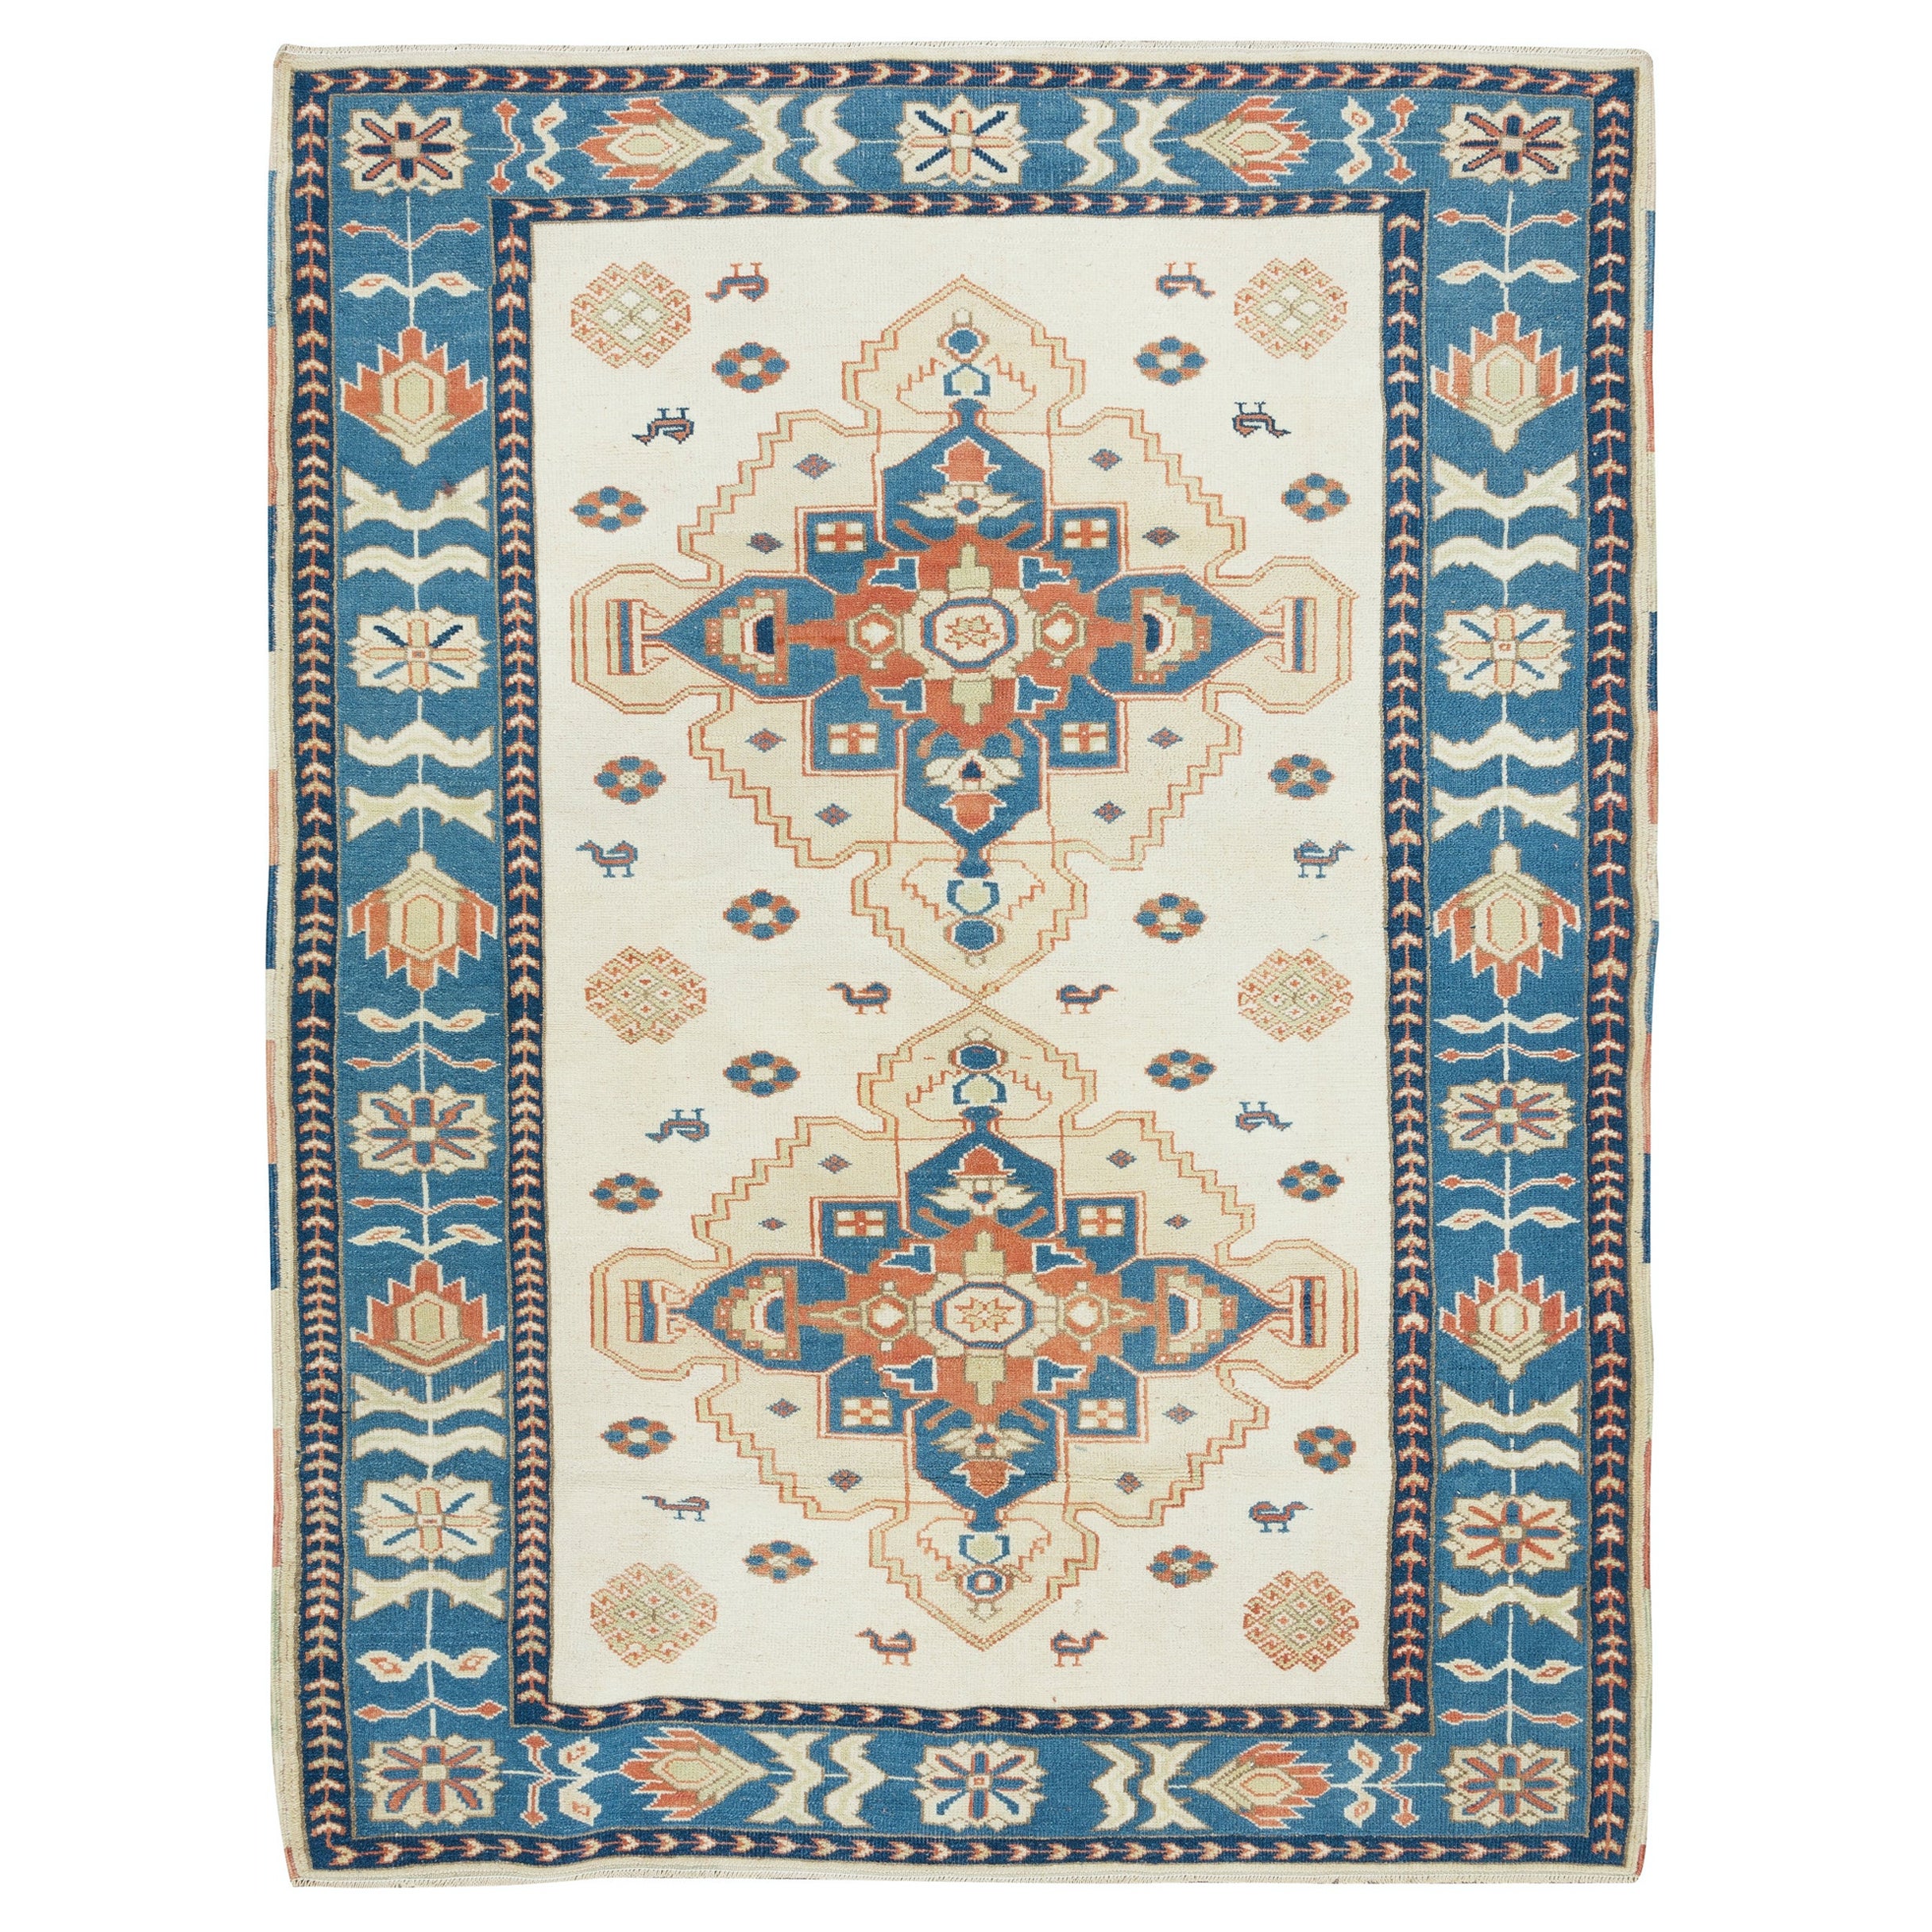 4.6x6.3 Ft New Turkish Wool Rug, Handmade Geometric Carpet in Beige and Blue For Sale